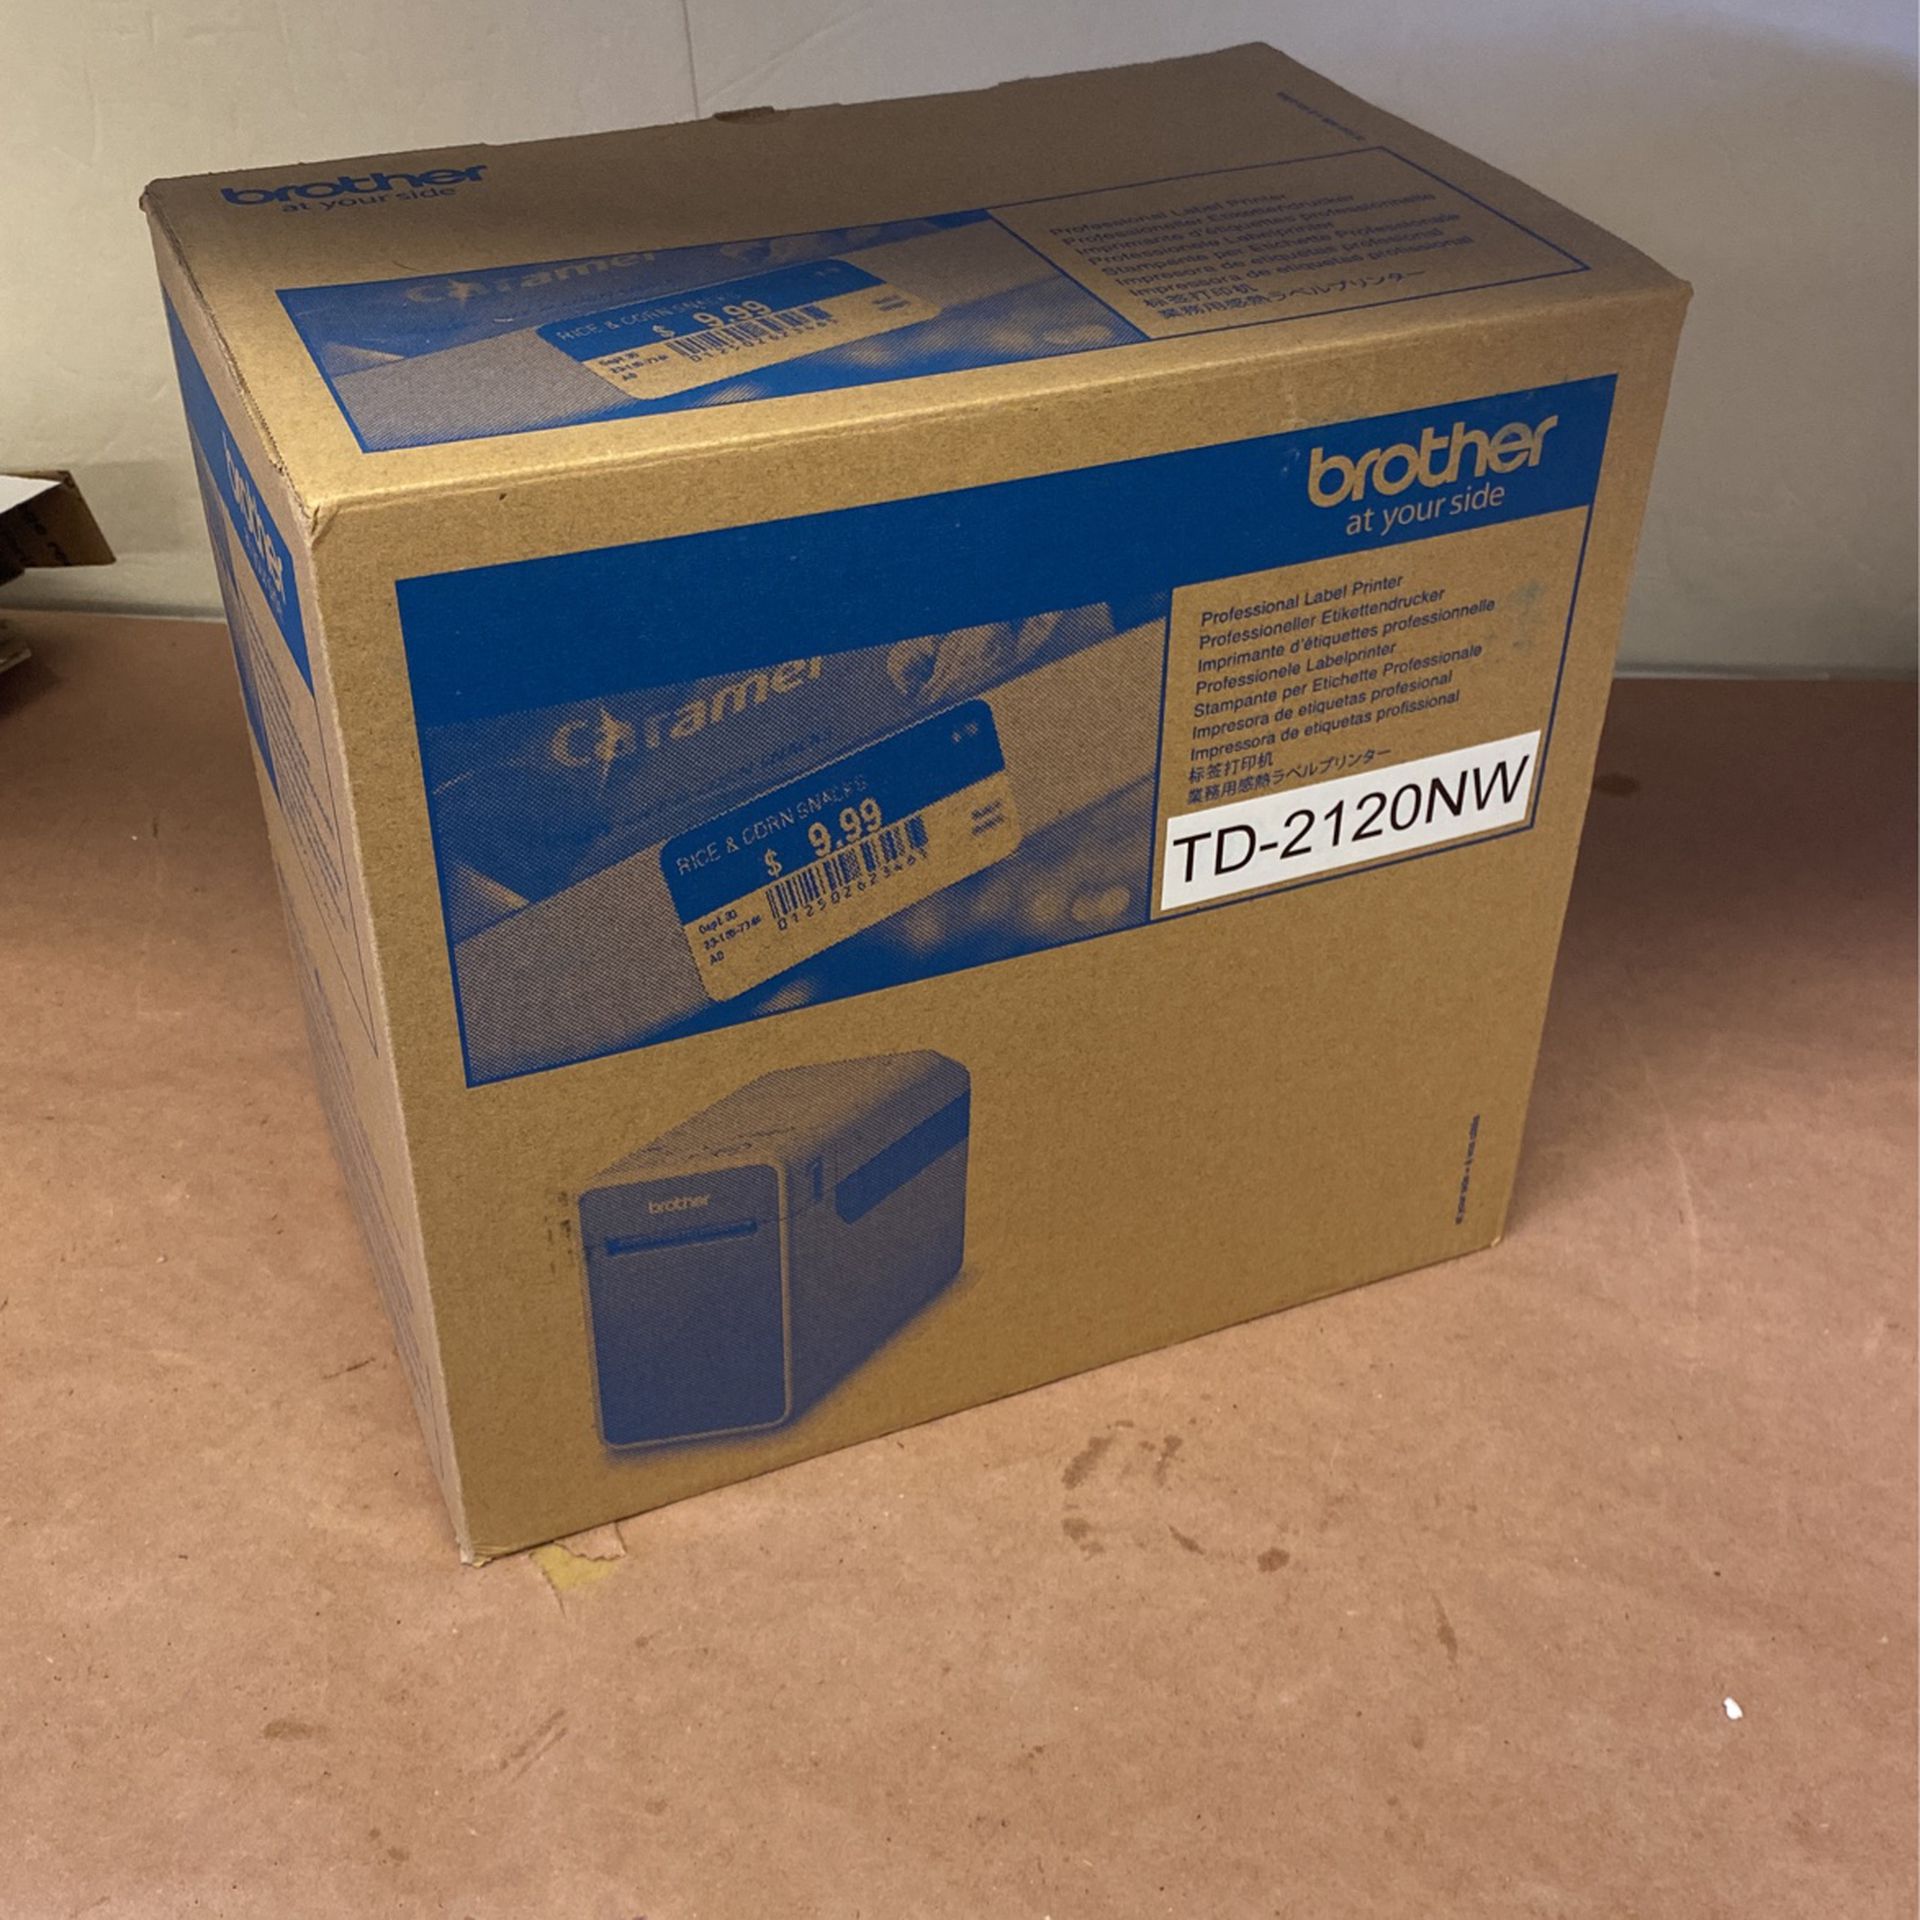 New - Brother Label Printer TD2120NW